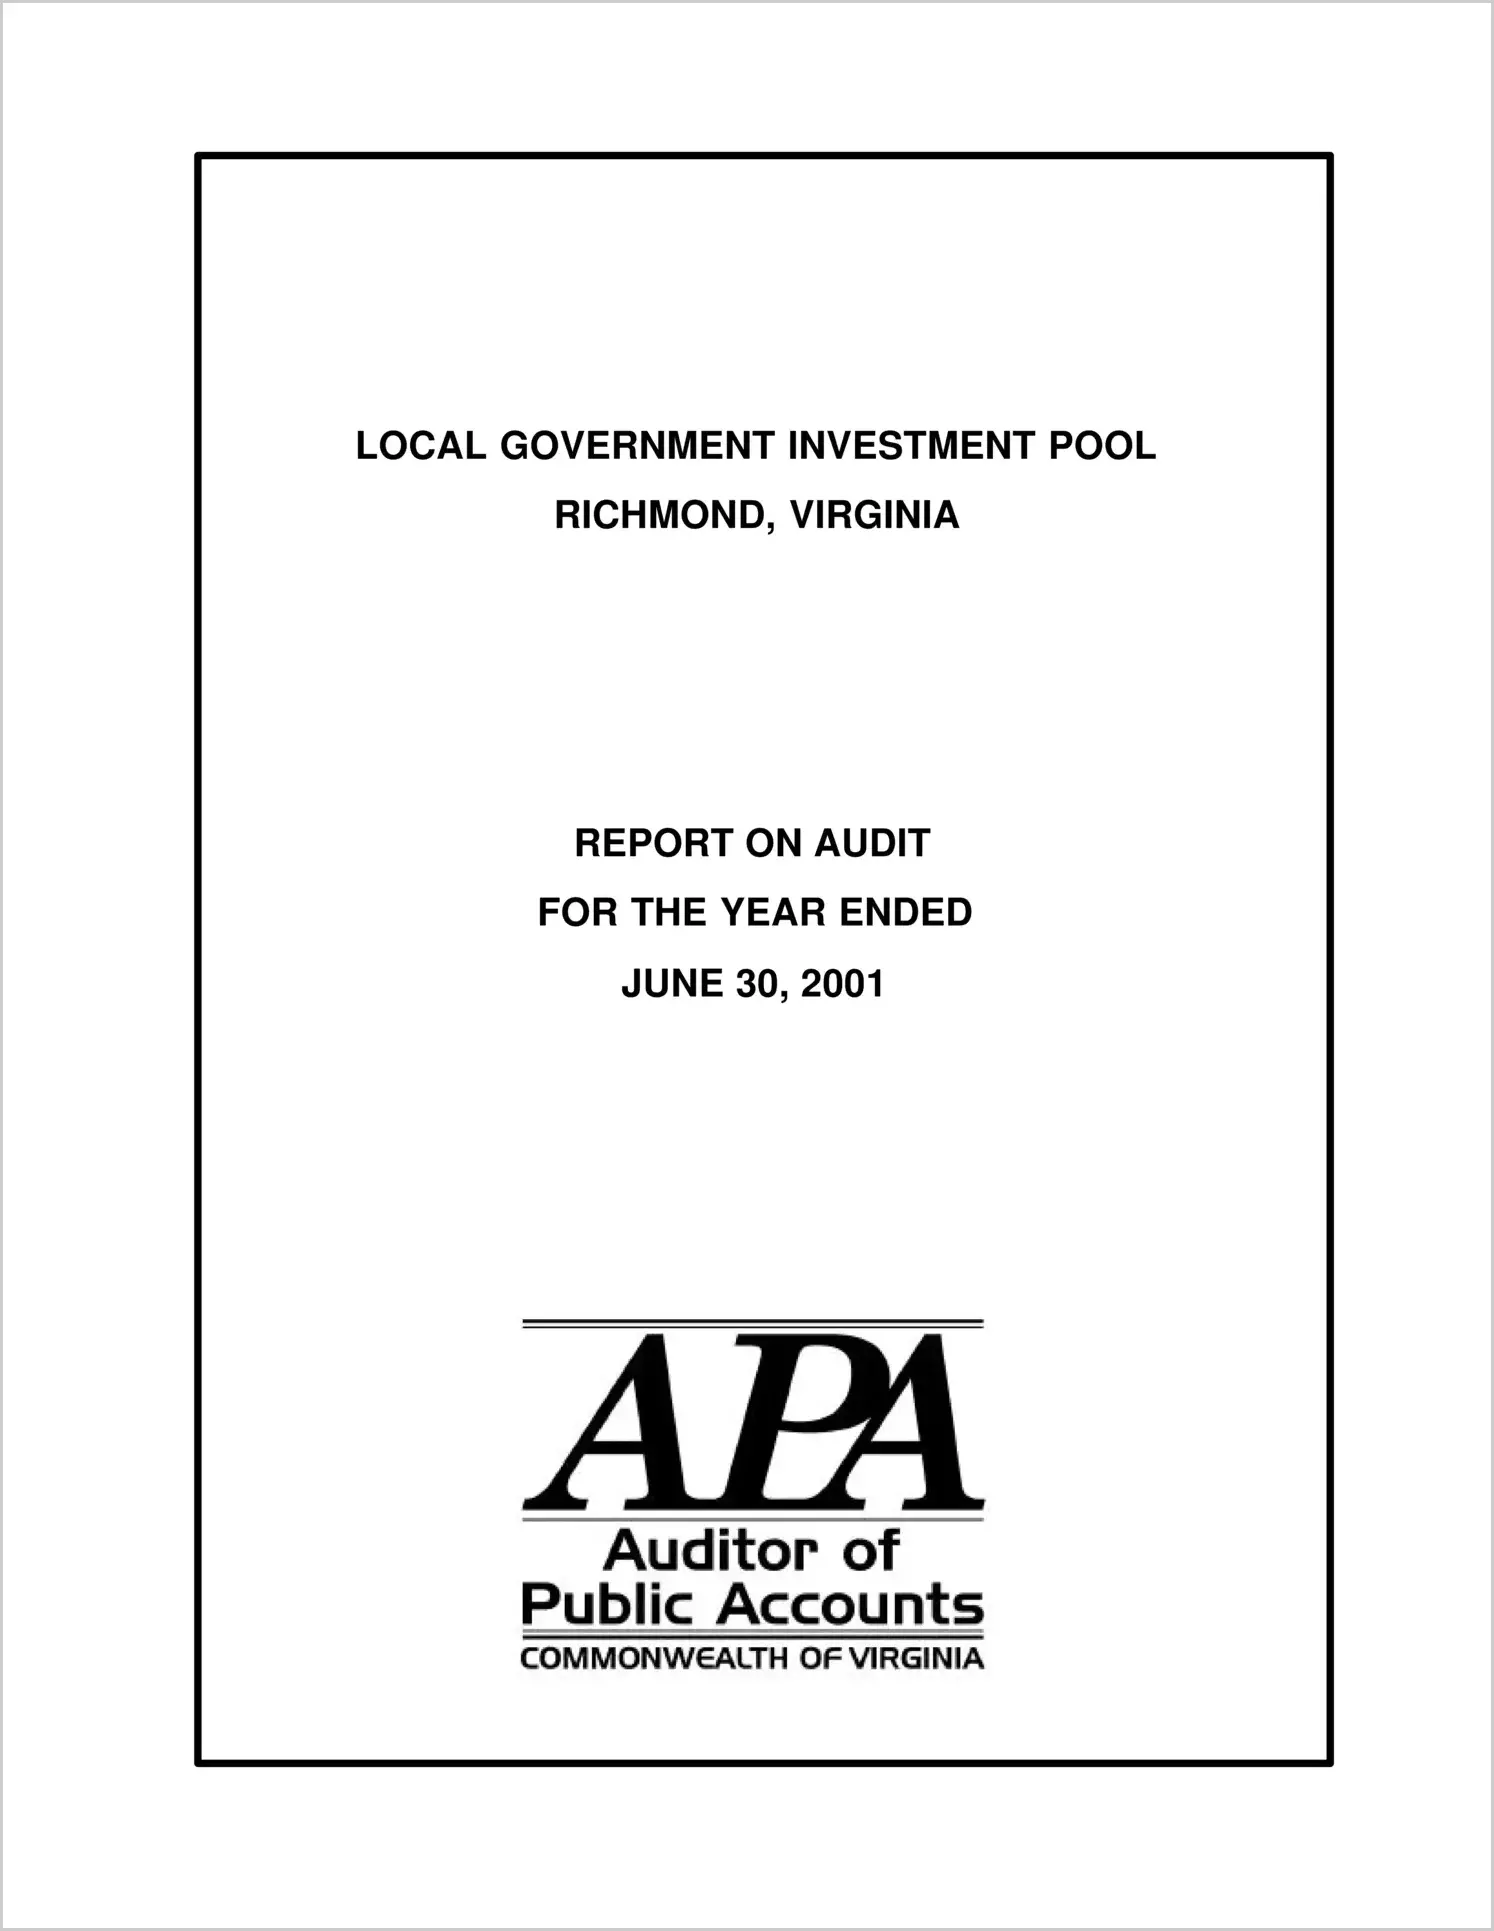 Local Government Investment Pool for the year ended June 30, 2001